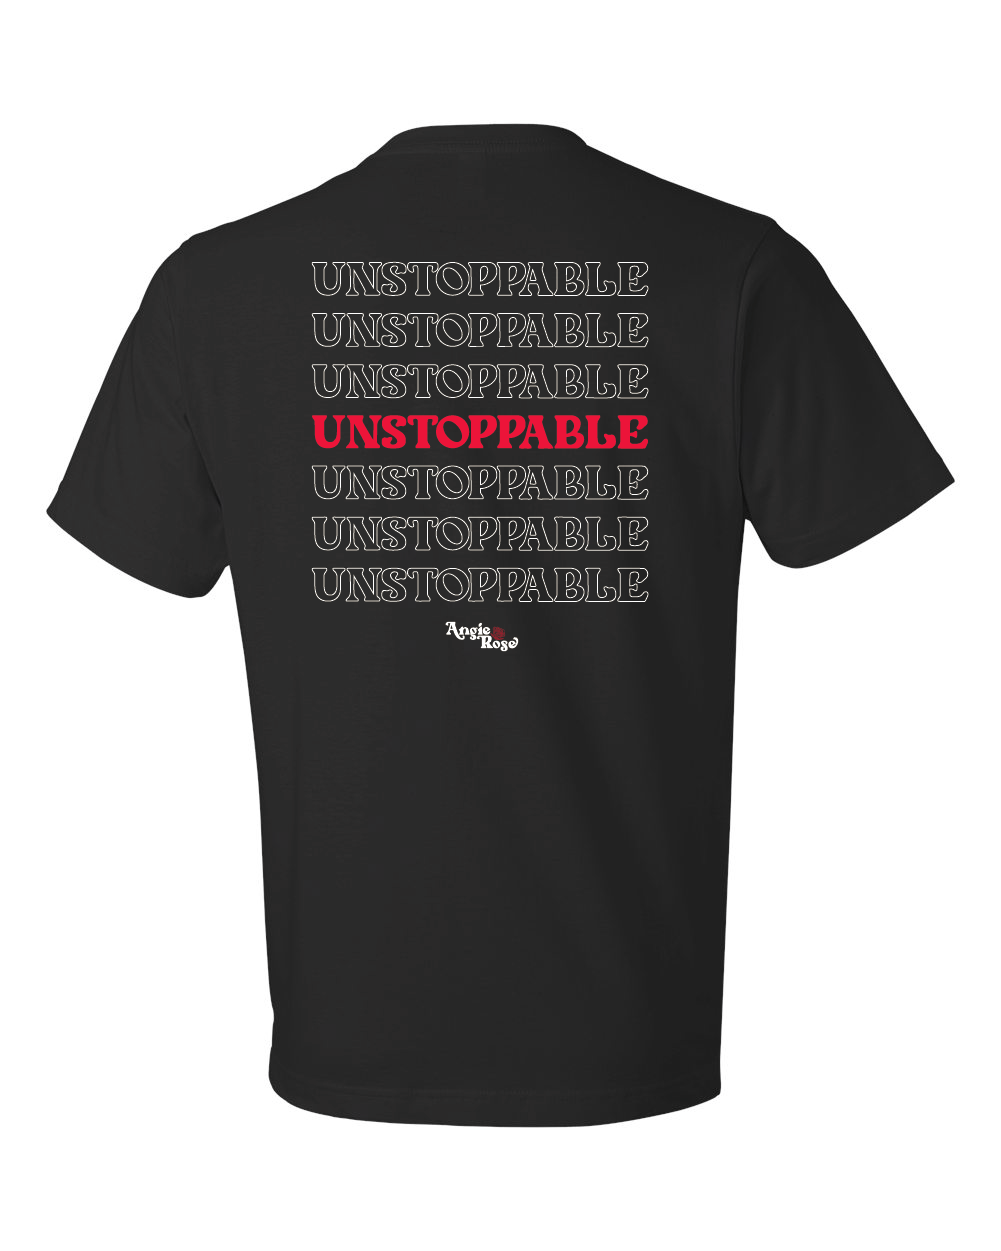 UNSTOPPABLE BlackT-Shirt